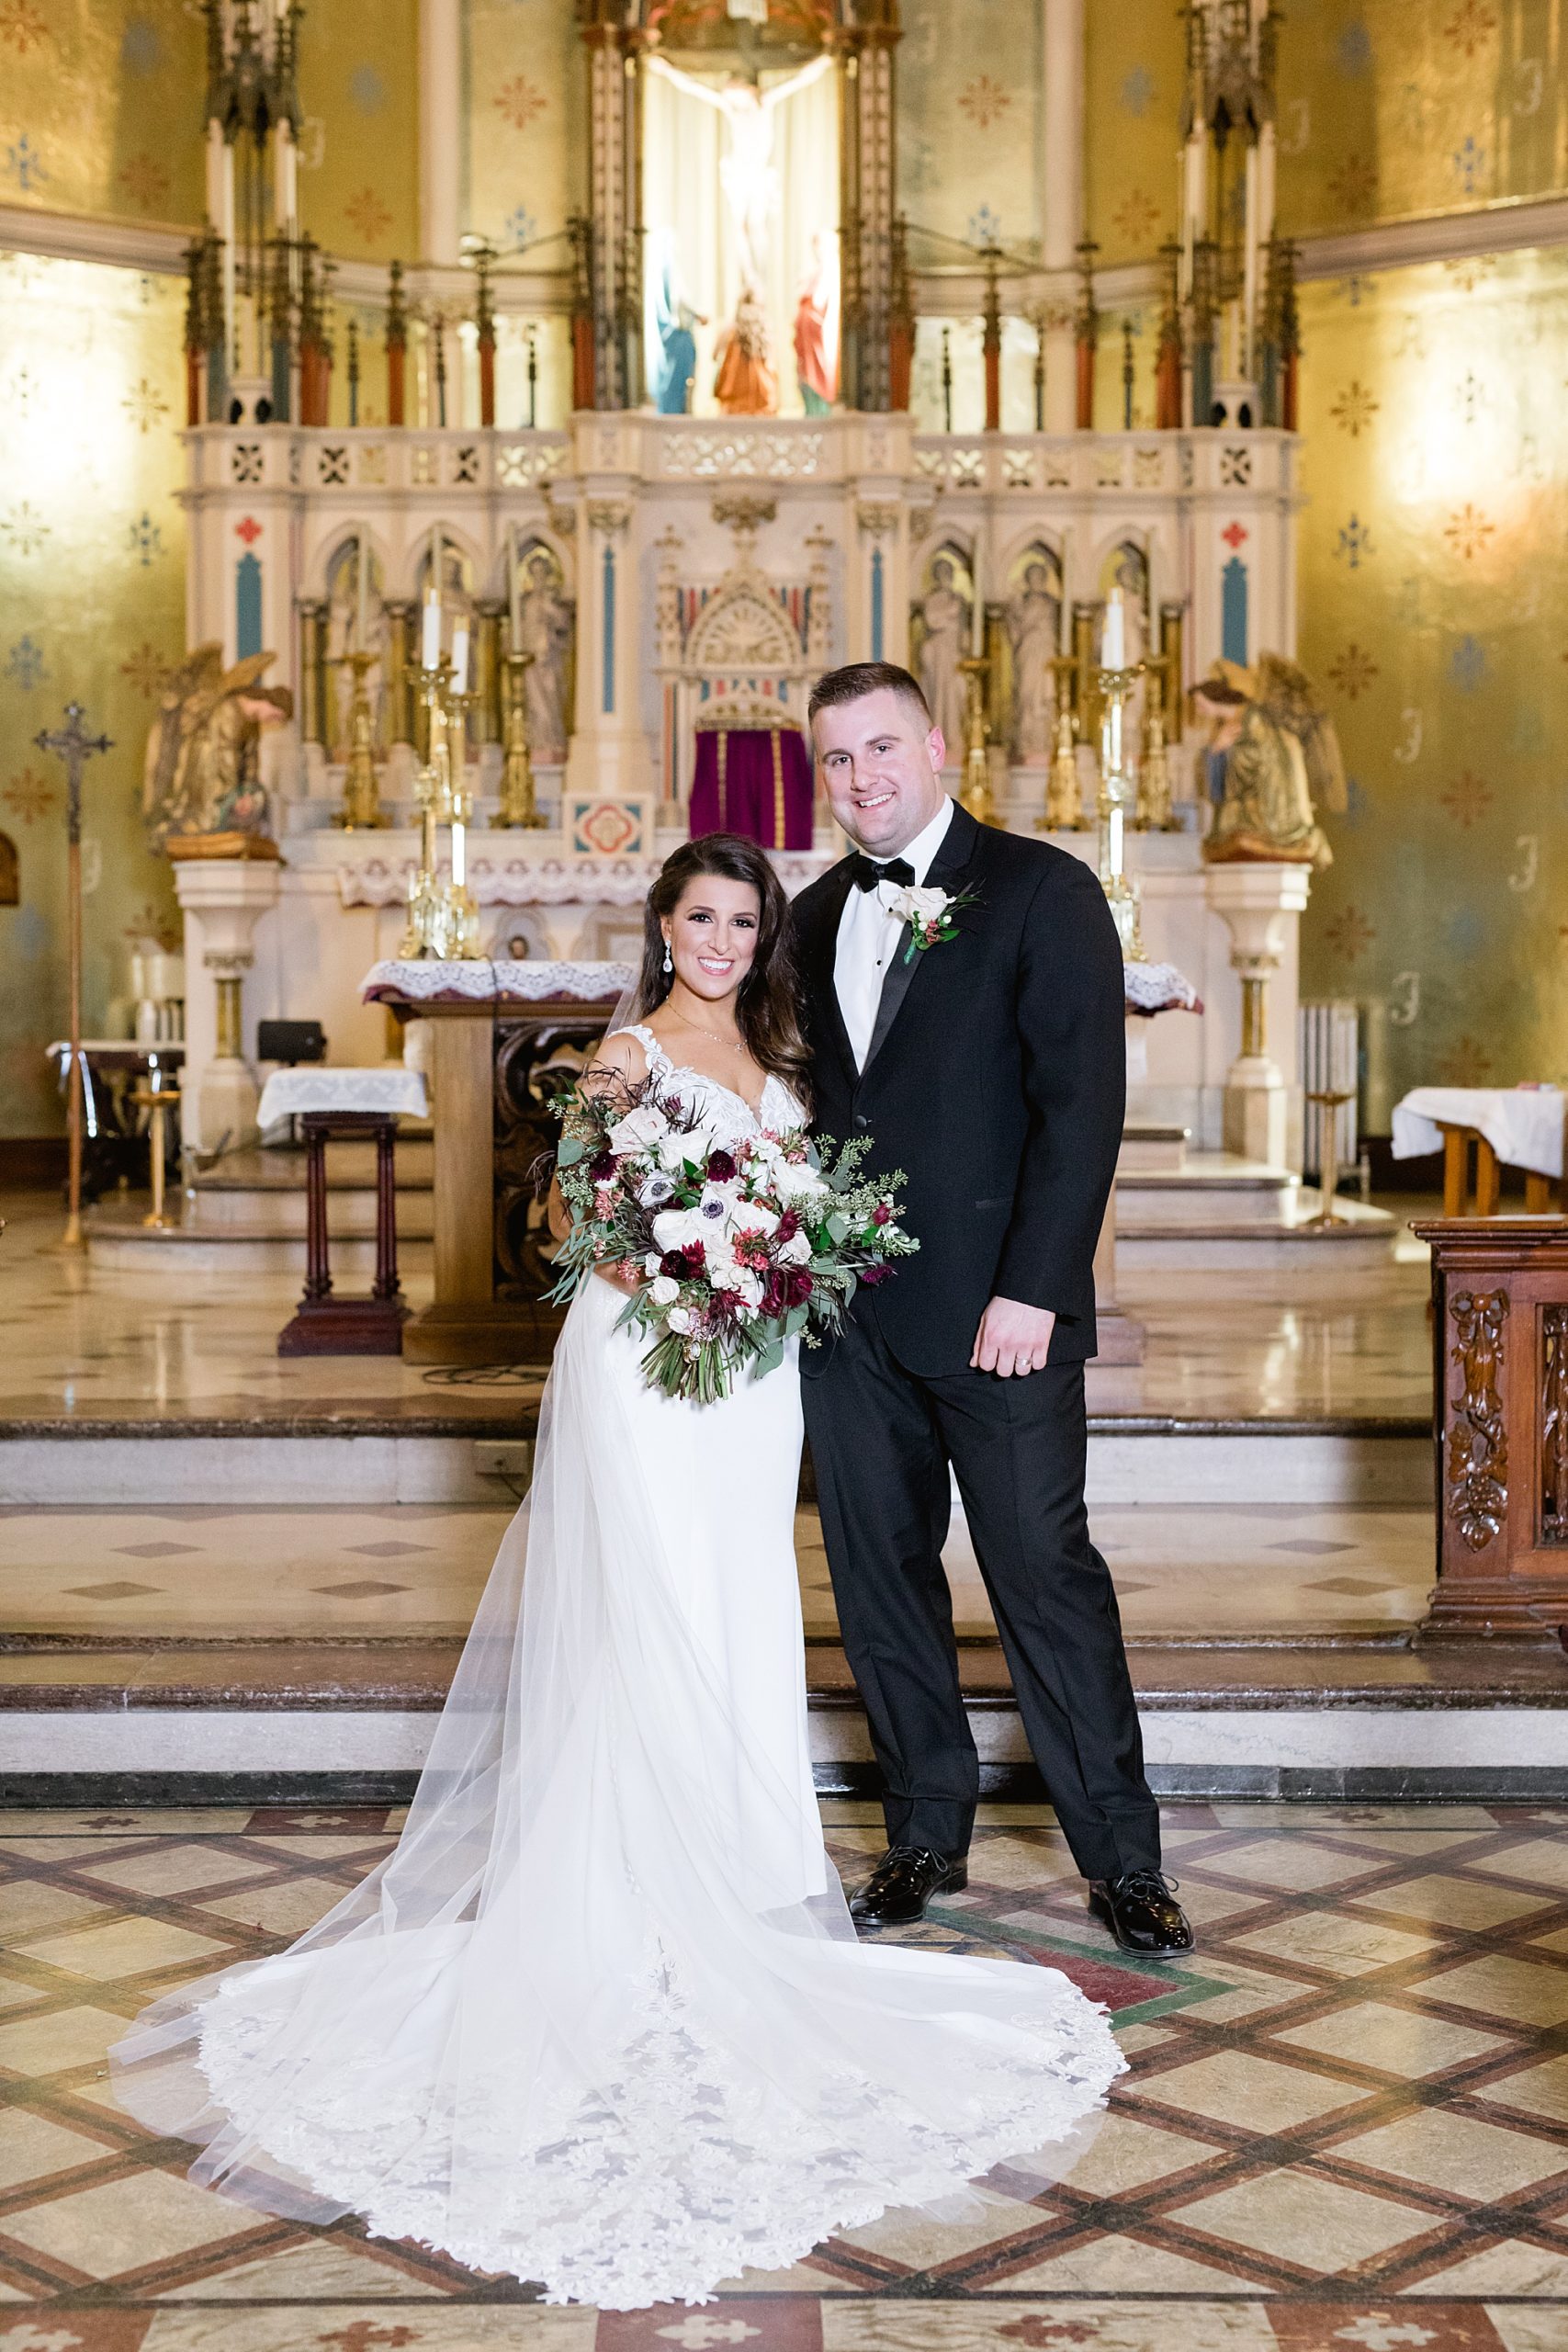 A classic burgundy and evergreen Christmas wedding at the Colony Club Detroit by Breanne Rochelle Photography.